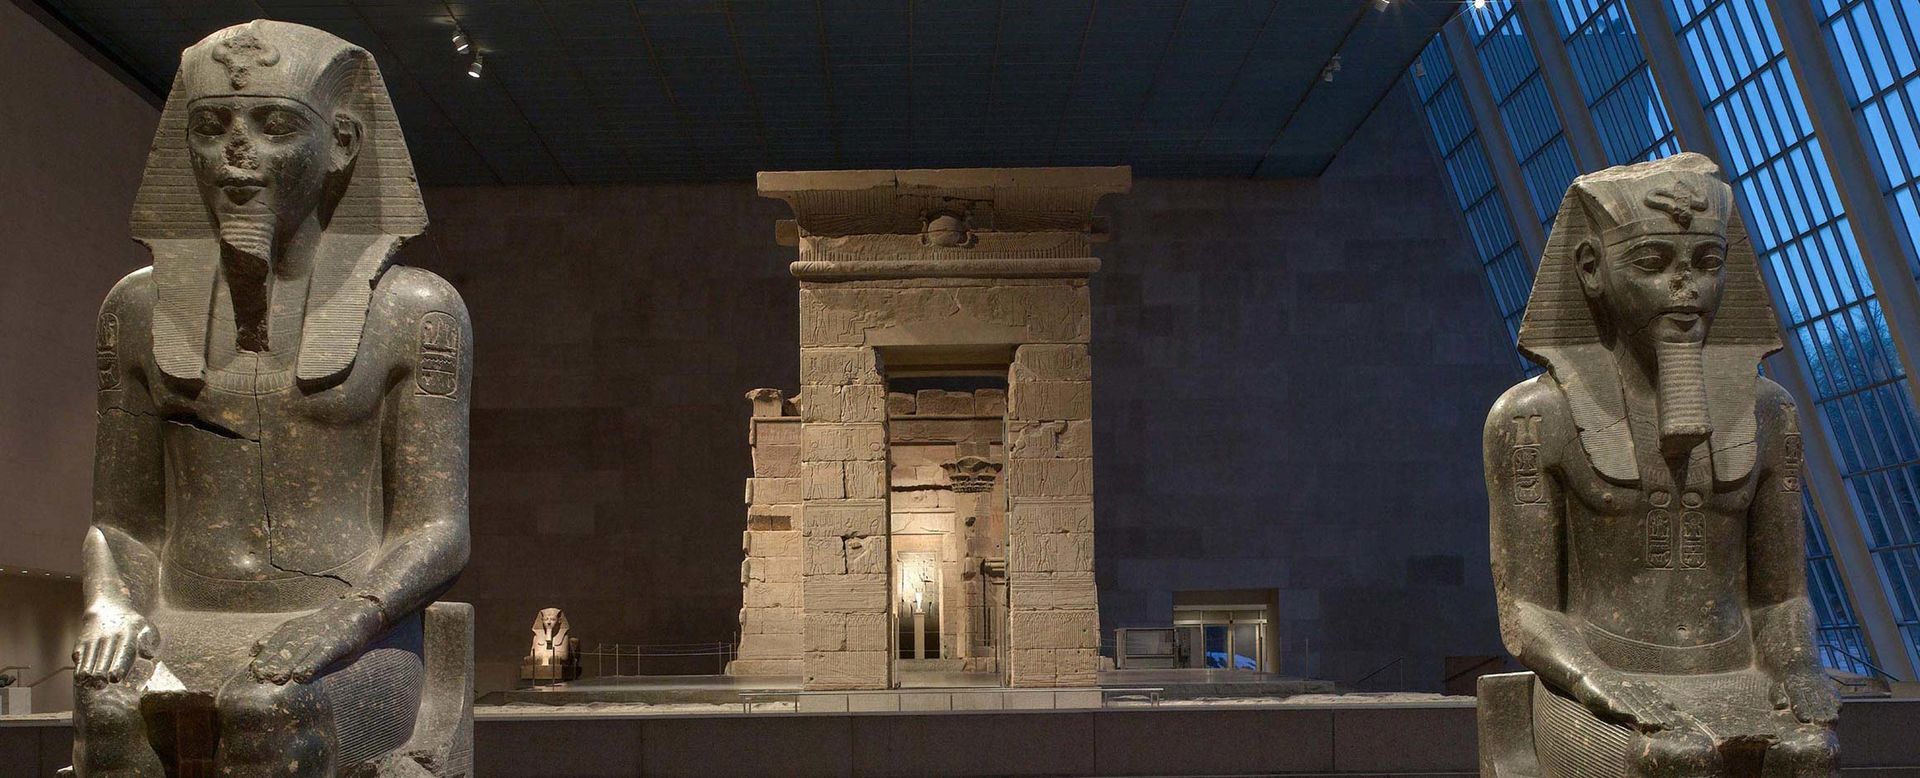 View of The Temple of Dendur at dusk